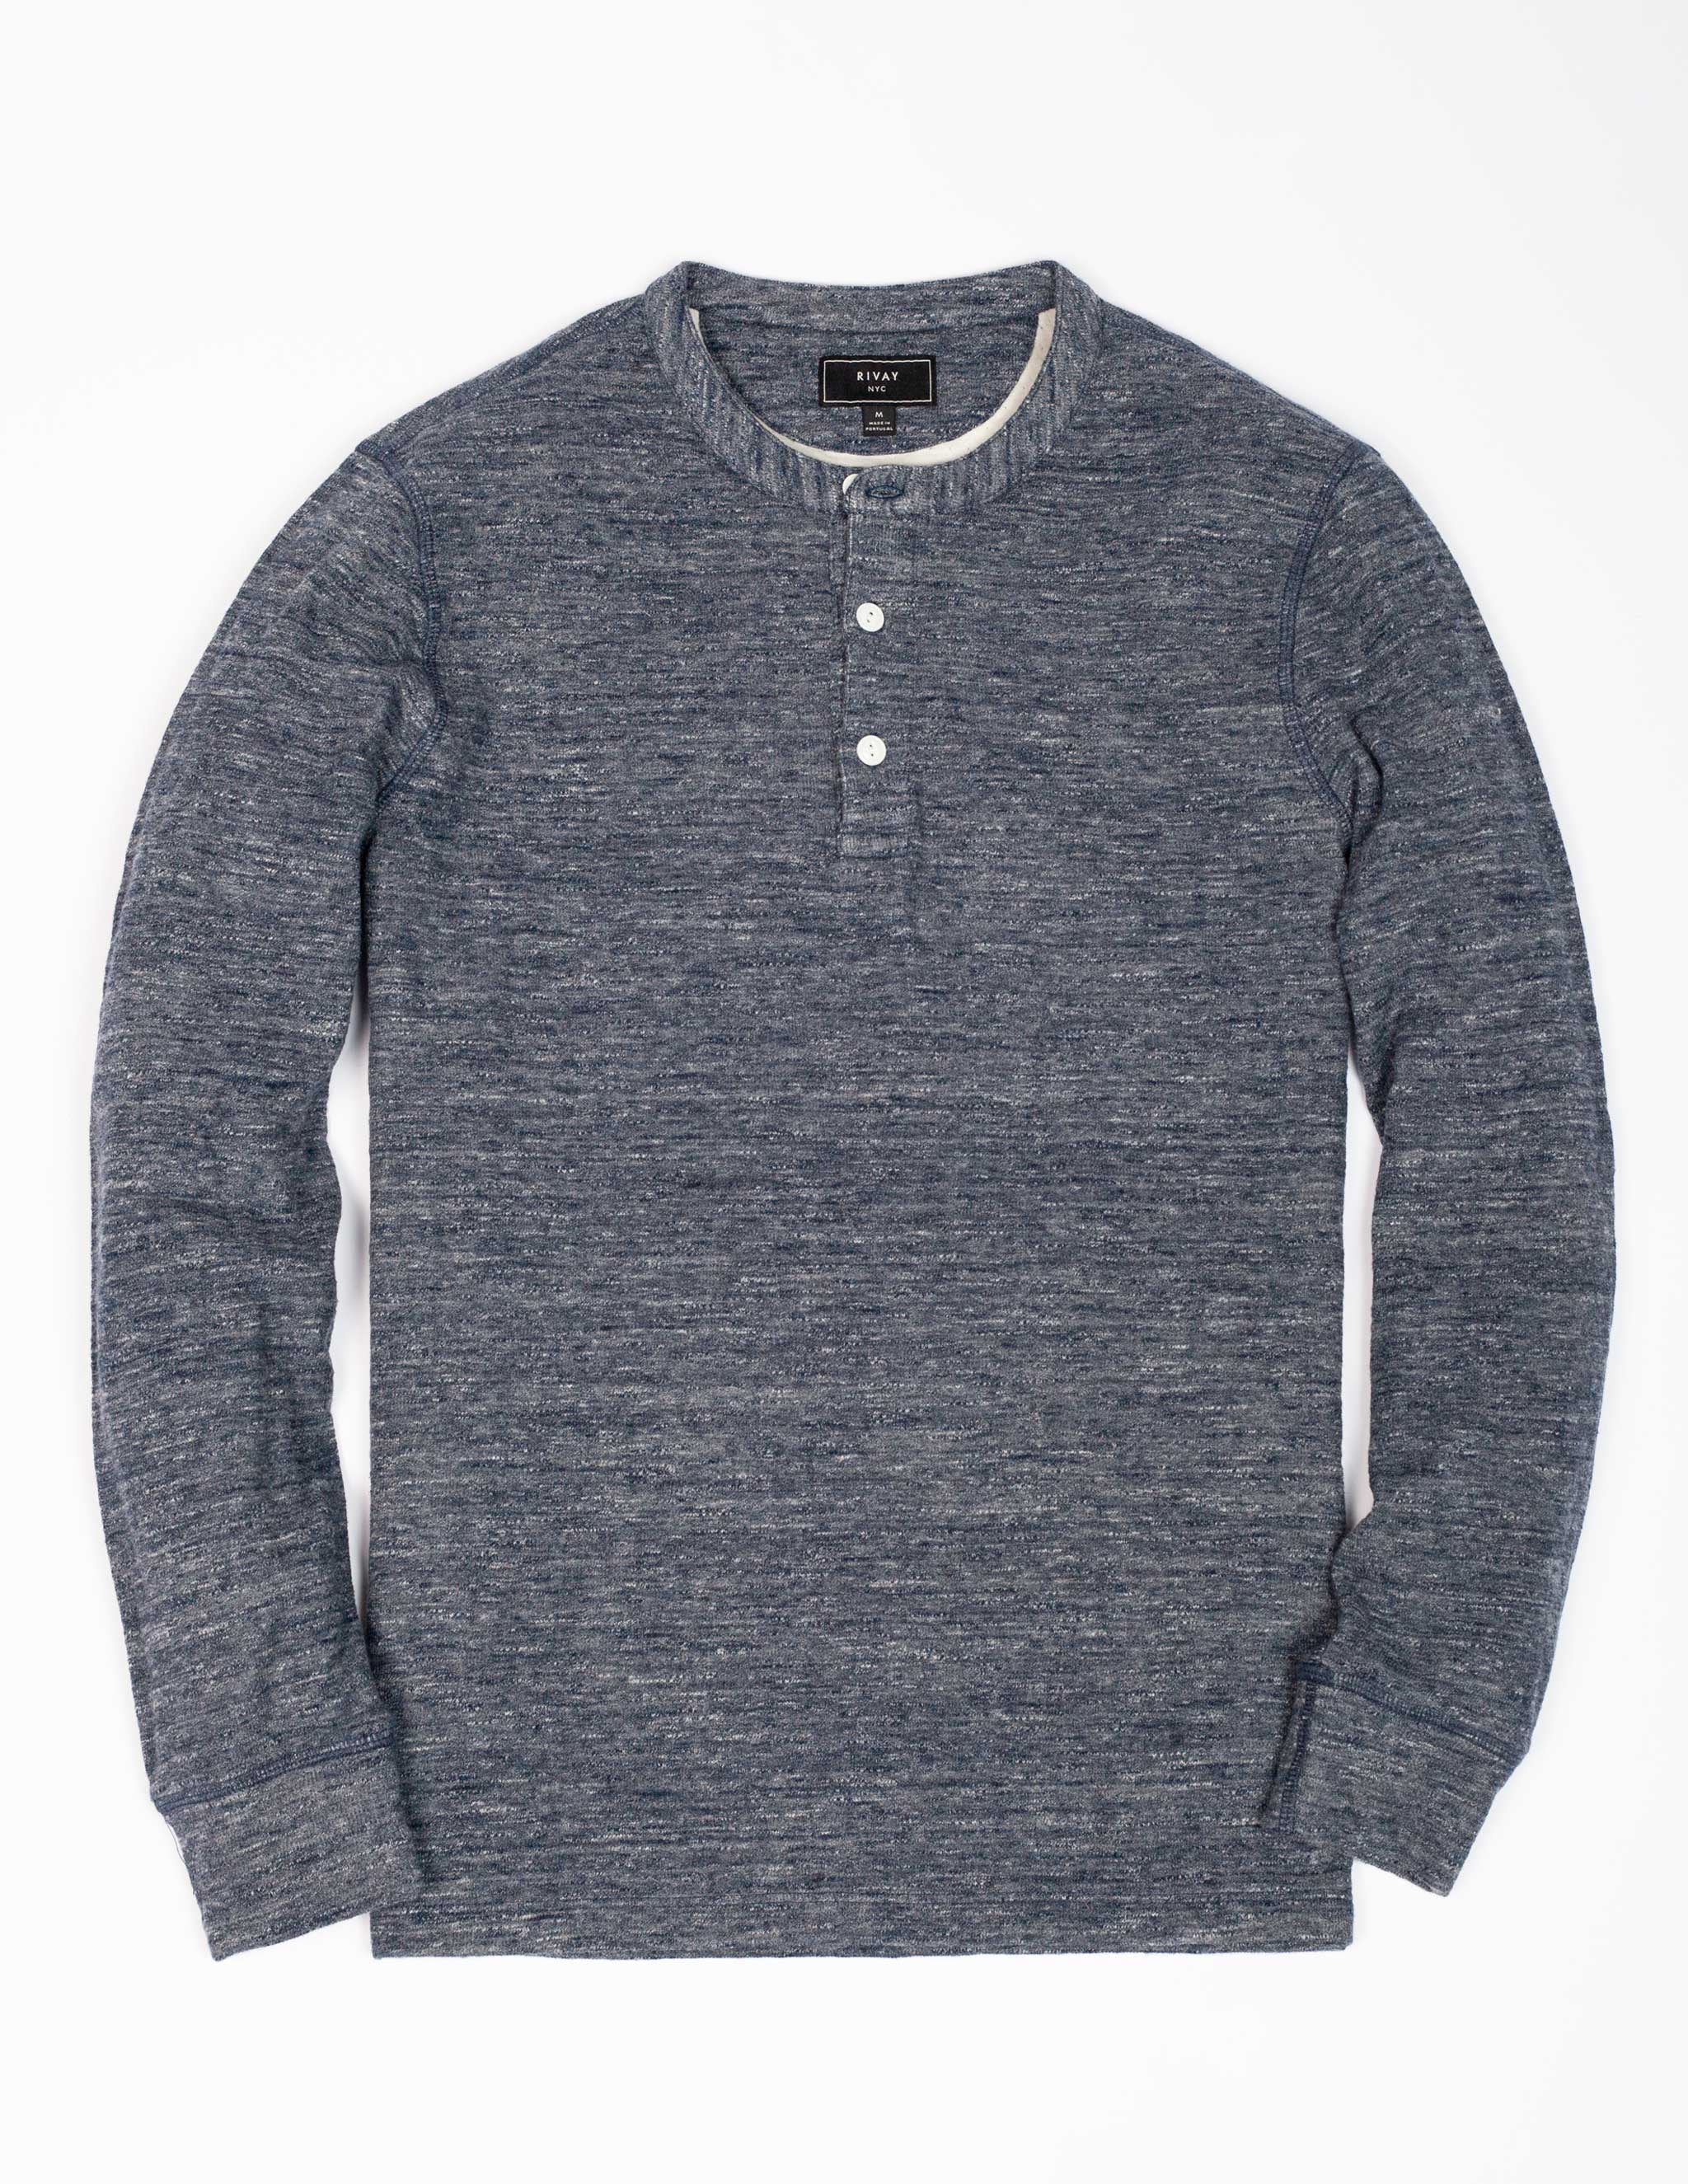 Ford Double Knit Henley in Marled Blue – RIVAY